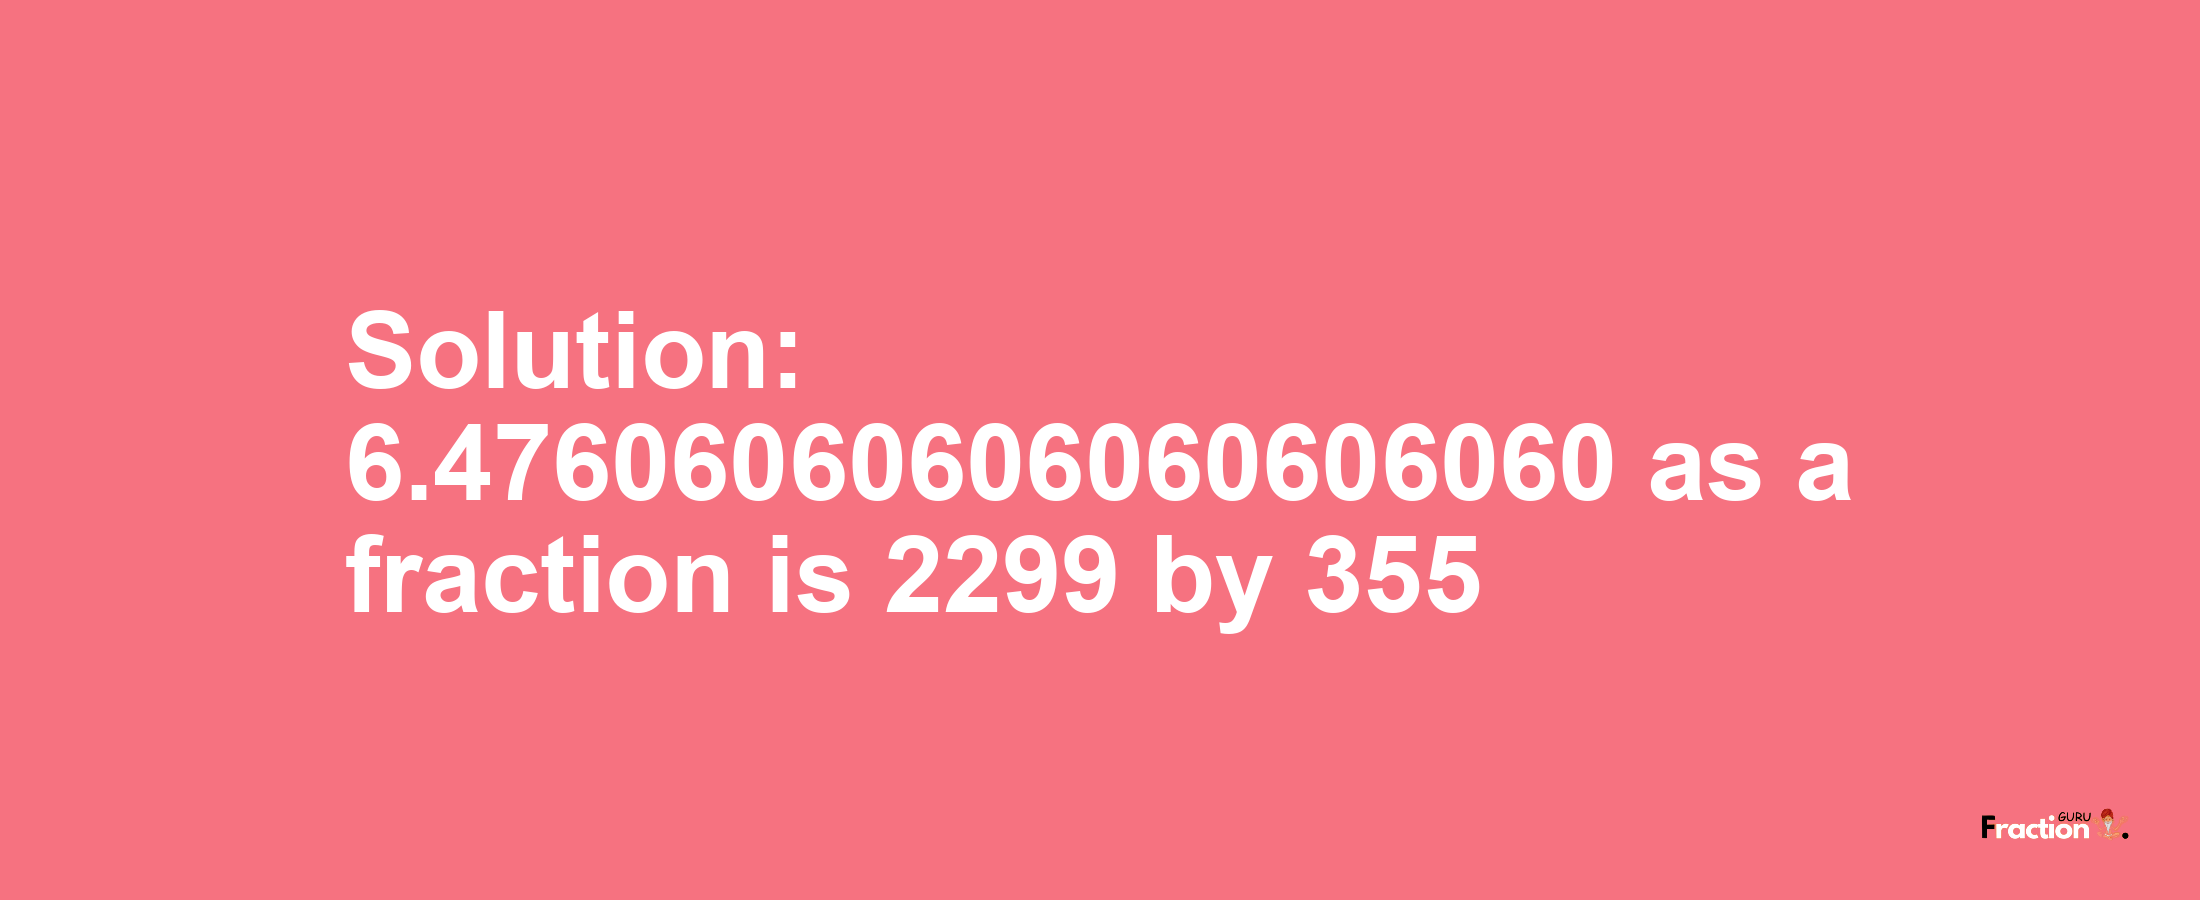 Solution:6.47606060606060606060 as a fraction is 2299/355